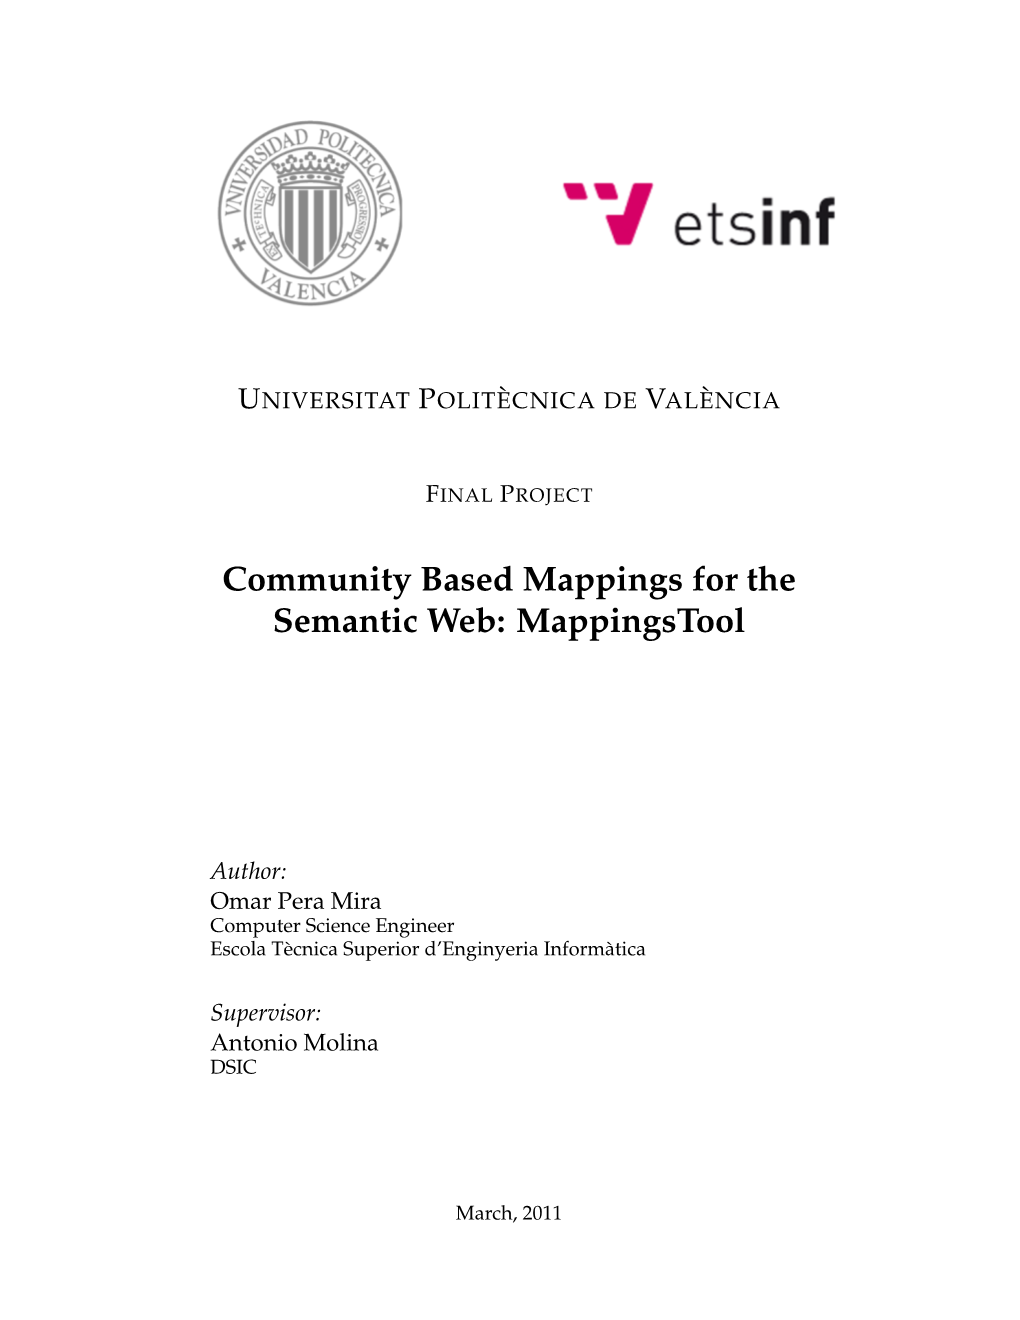 Community Based Mappings for the Semantic Web: Mappingstool